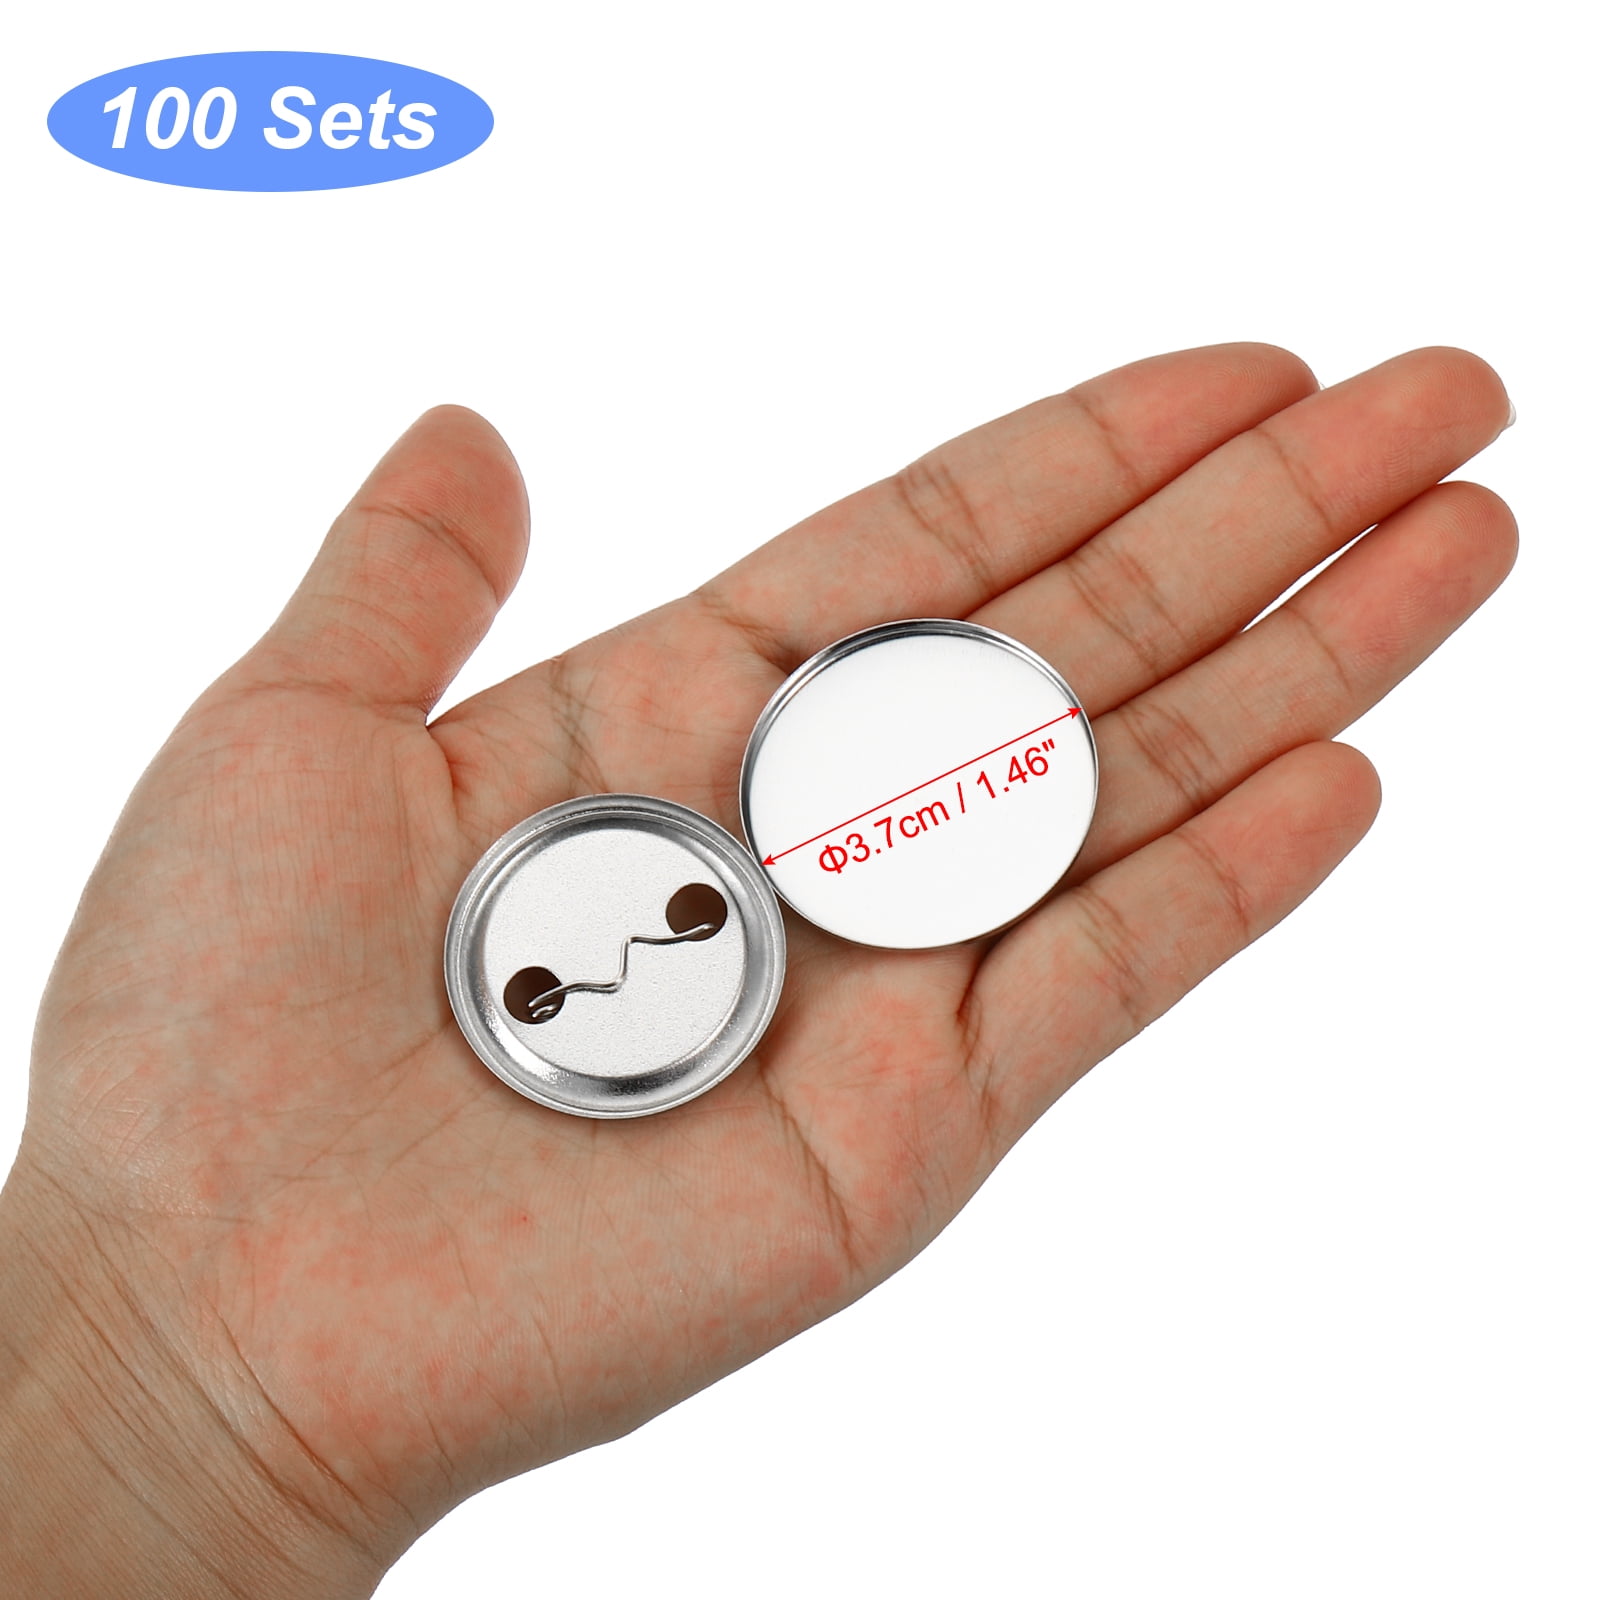 Akamino 100 Pieces Blank Badge Button Parts for Button Making Machine - Metal Shells and Plastic Base Components, Badge Making Supplies for DIY Arts